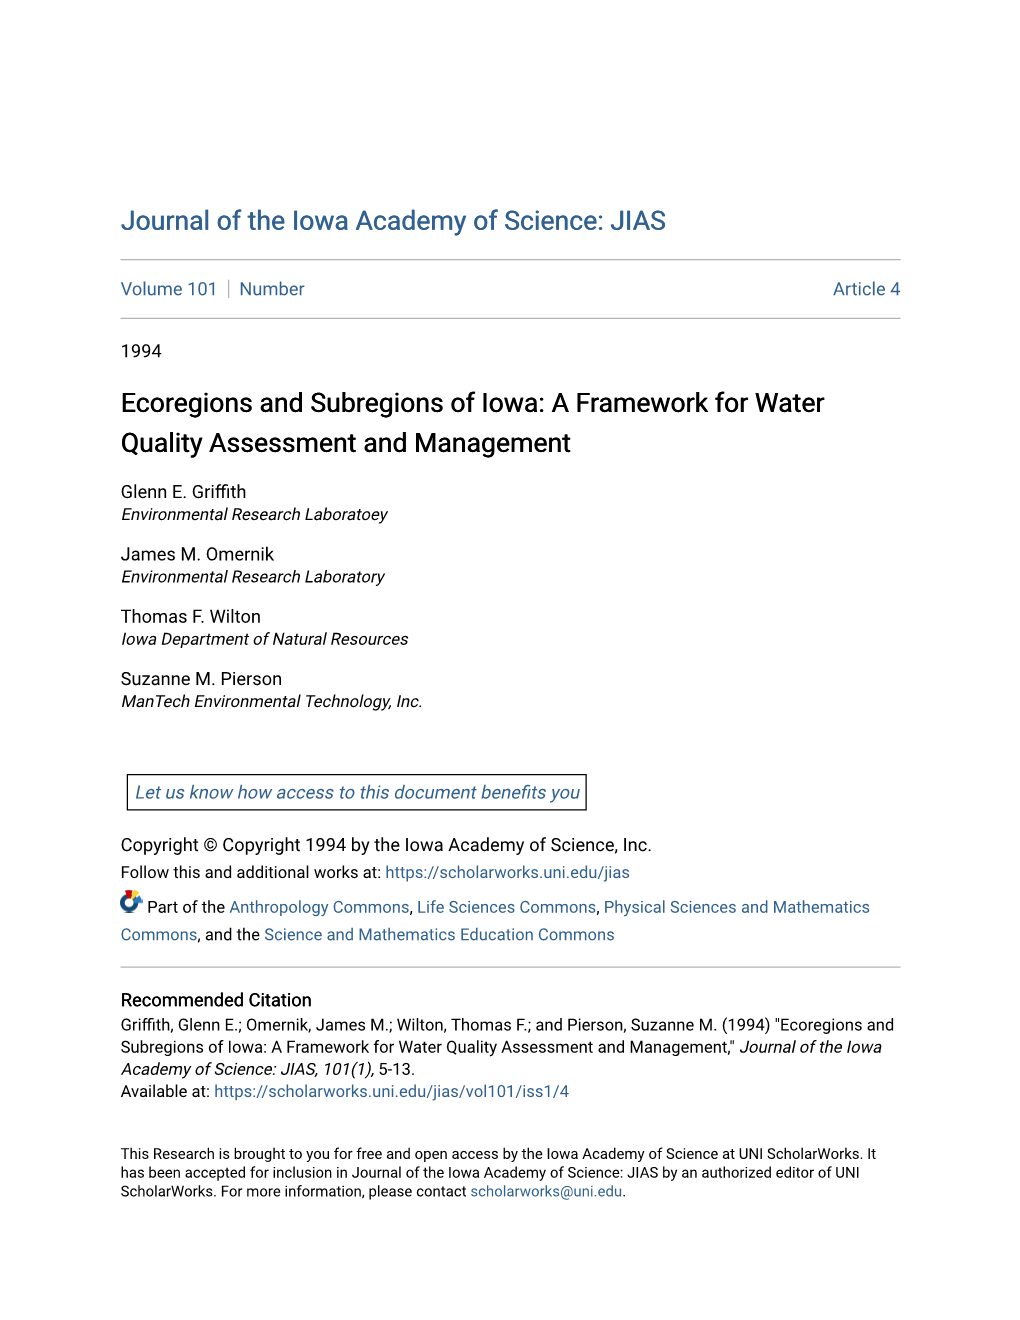 Ecoregions and Subregions of Iowa: a Framework for Water Quality Assessment and Management